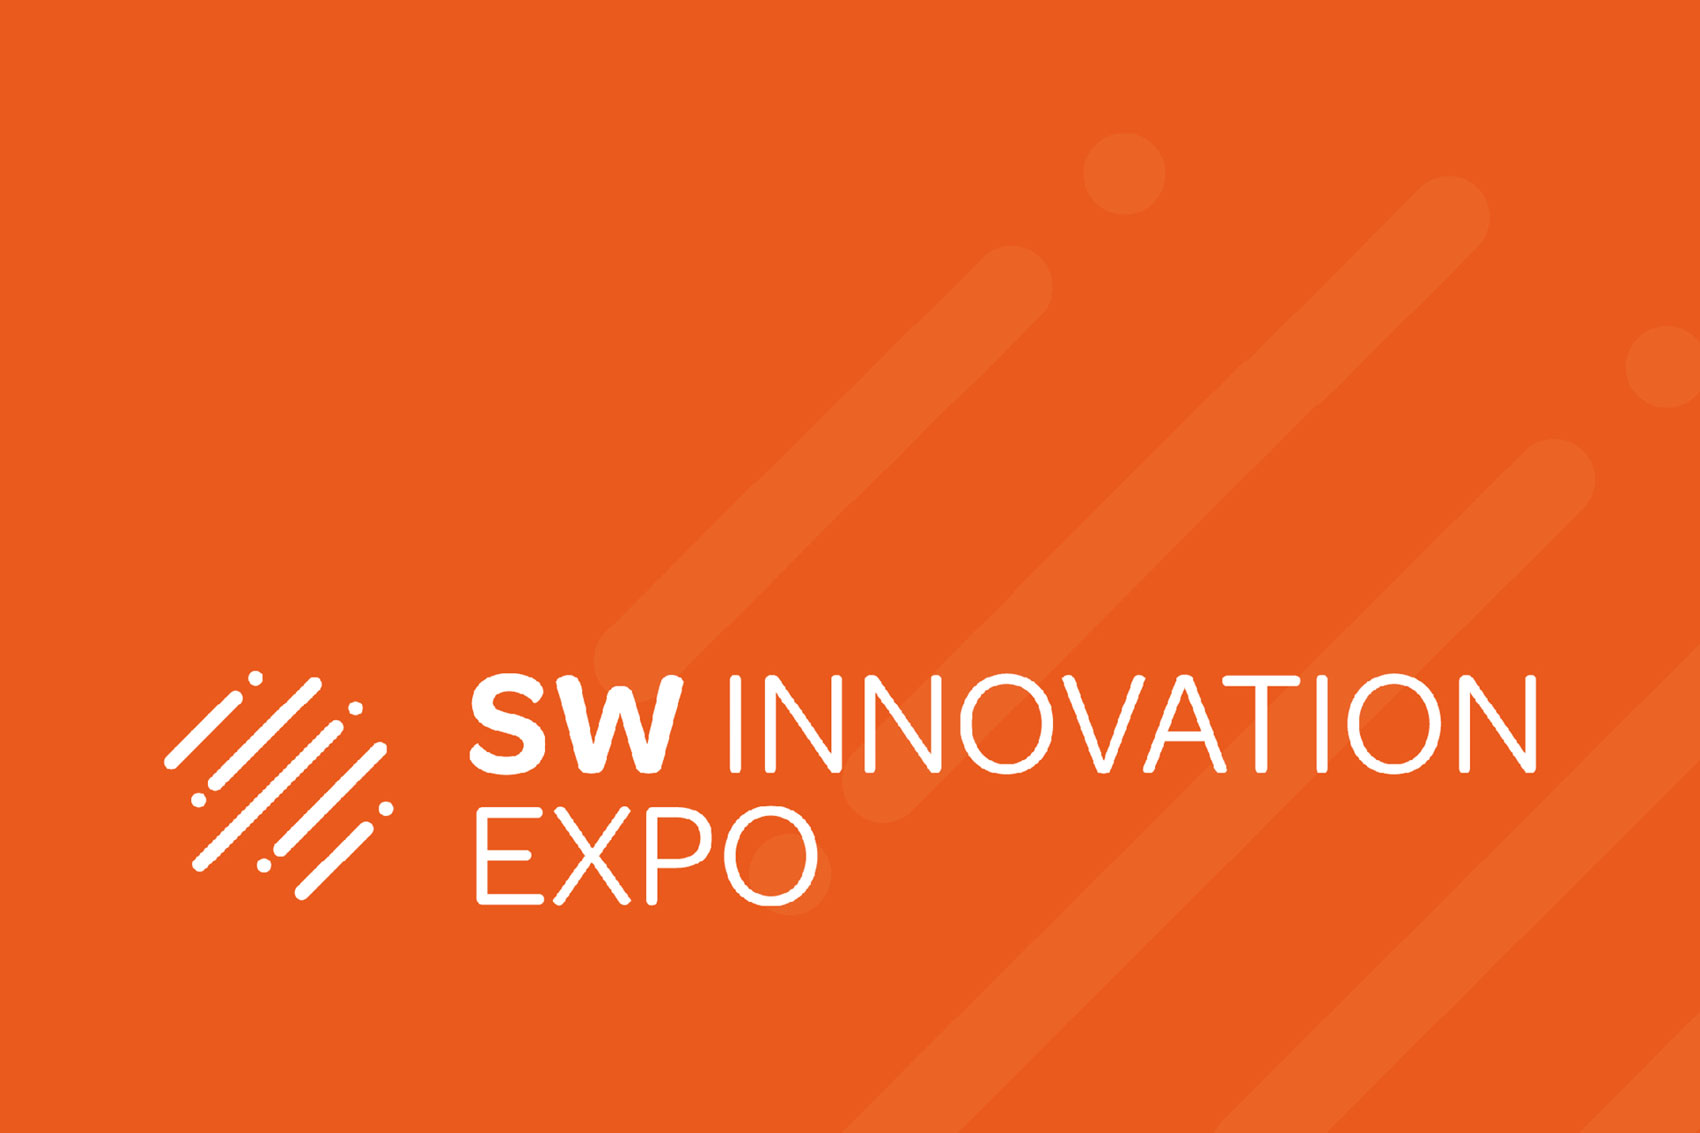 South west innovation expo